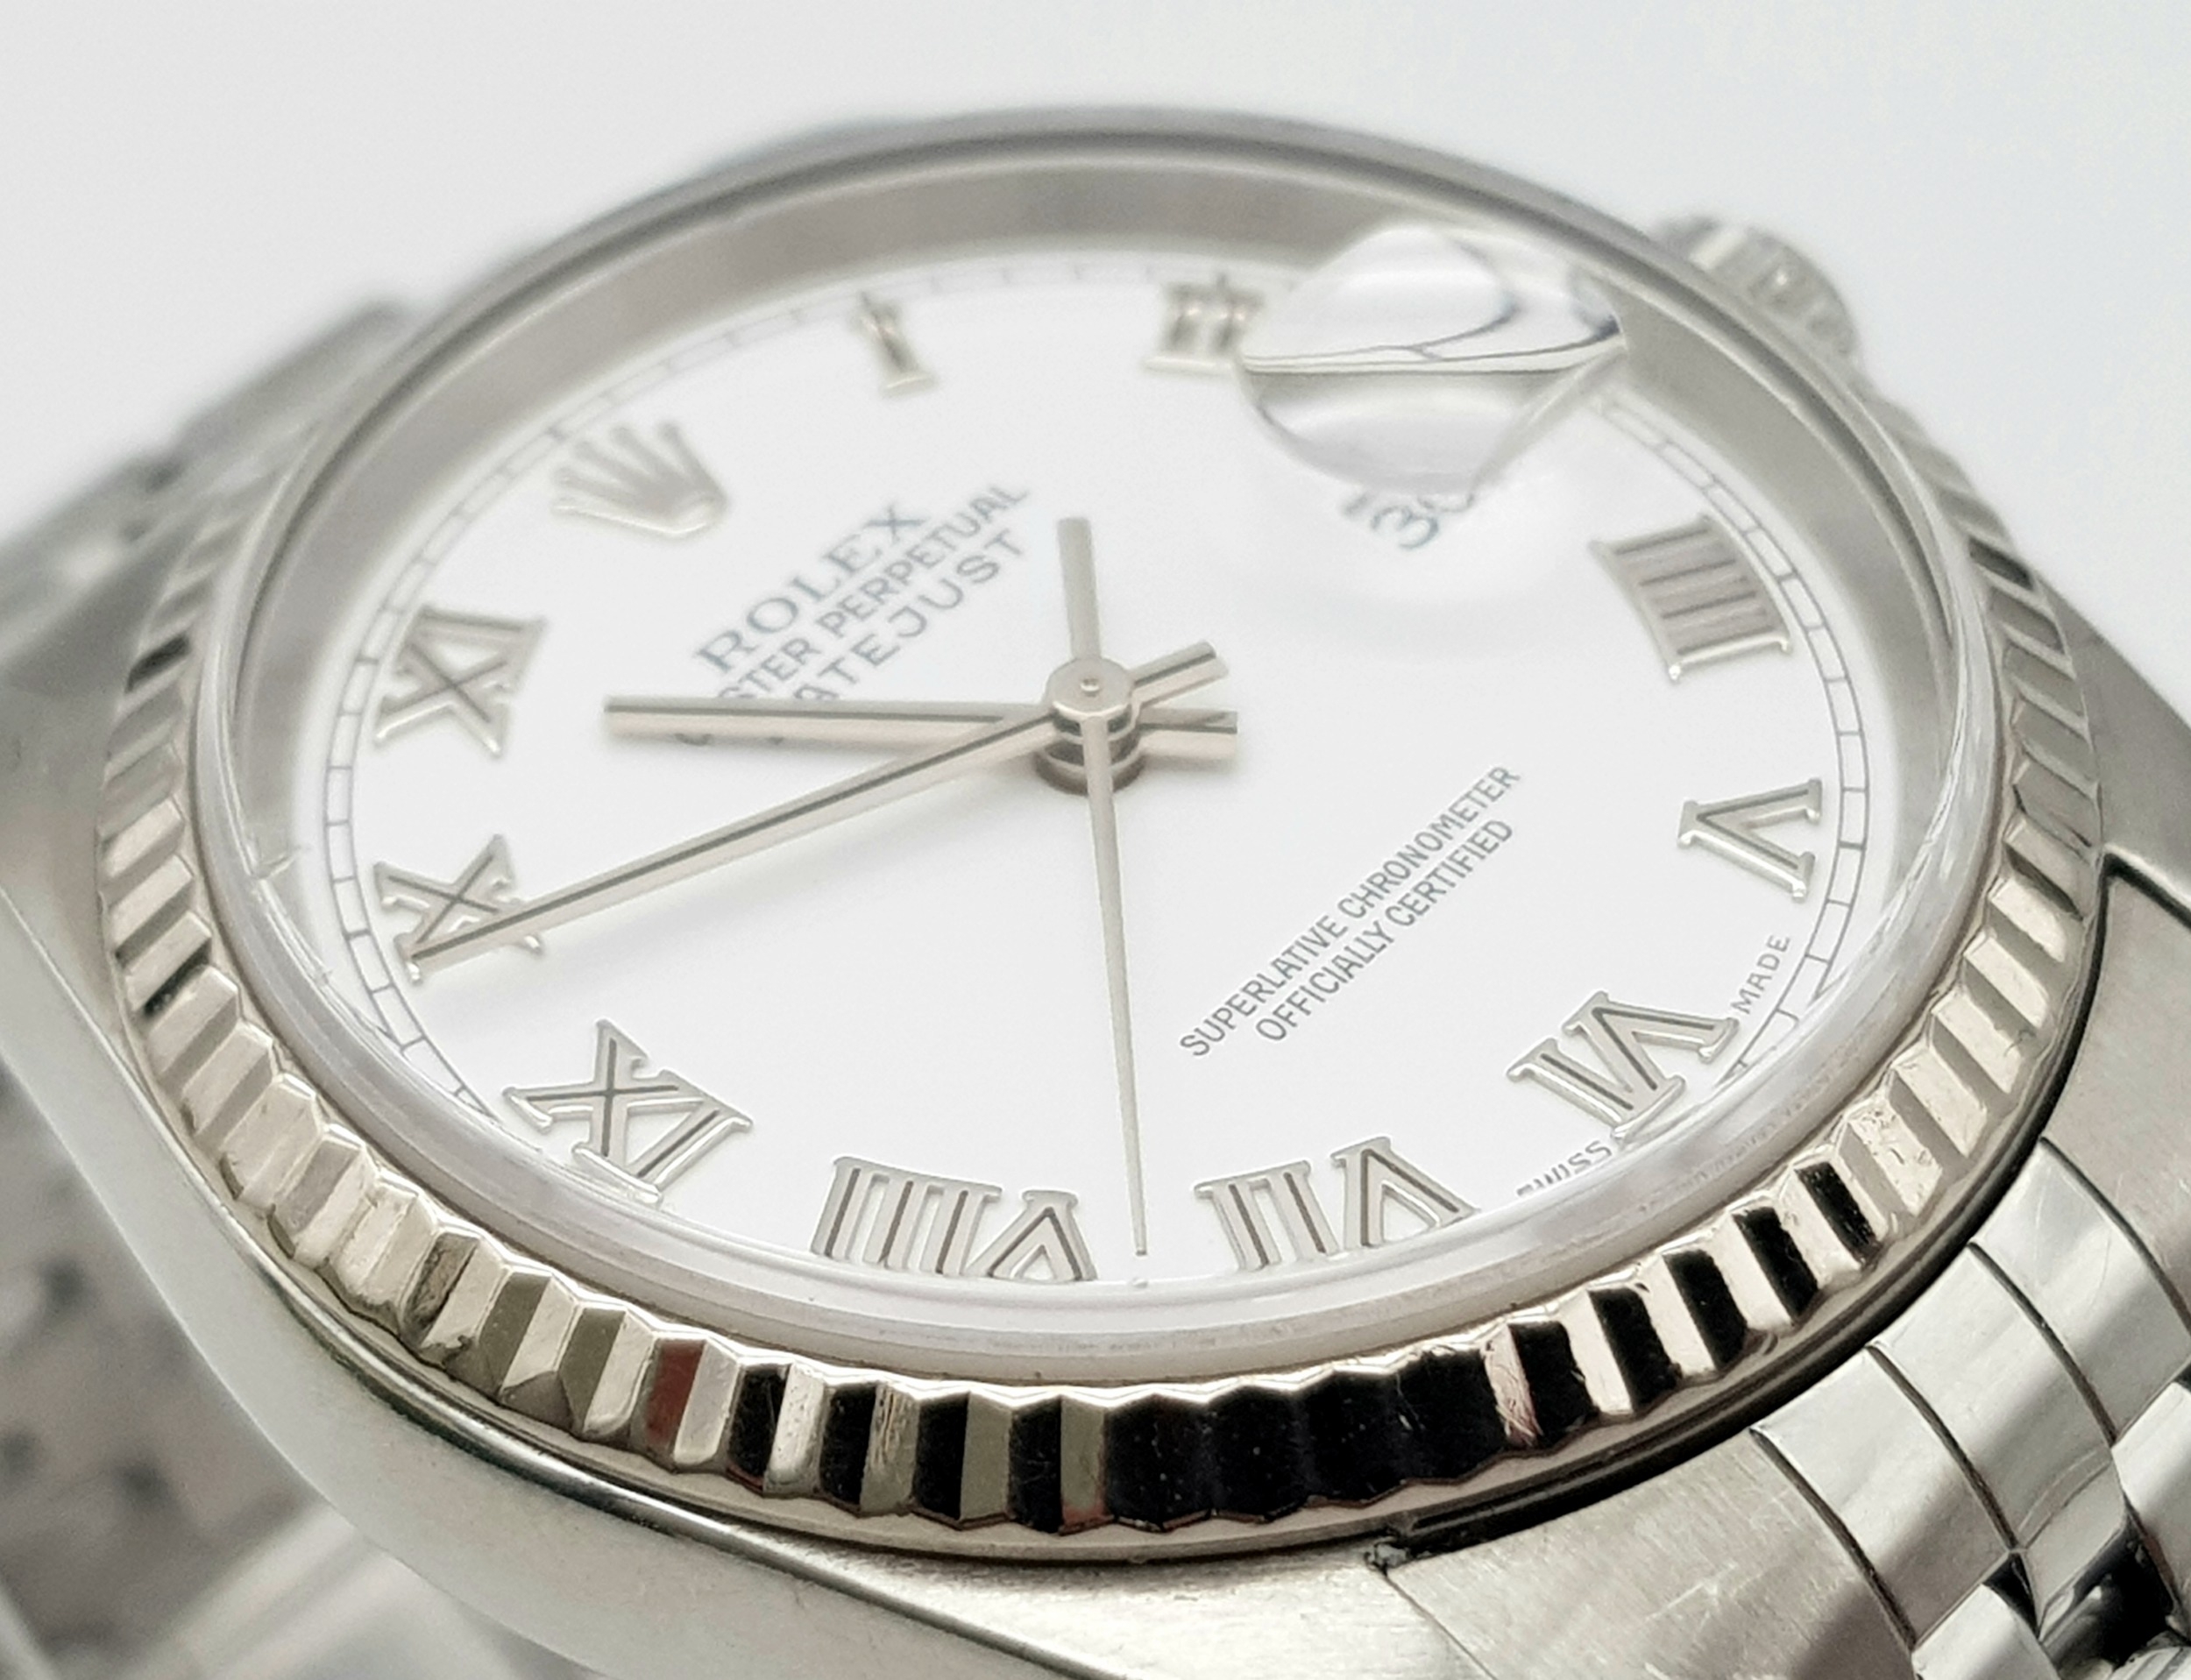 A ROLEX OYSTER PERPETUAL DATEJUST GENTS WATCH IN STAINLESS STEEL WITH WHITE DIAL AND ROMAN - Image 8 of 9